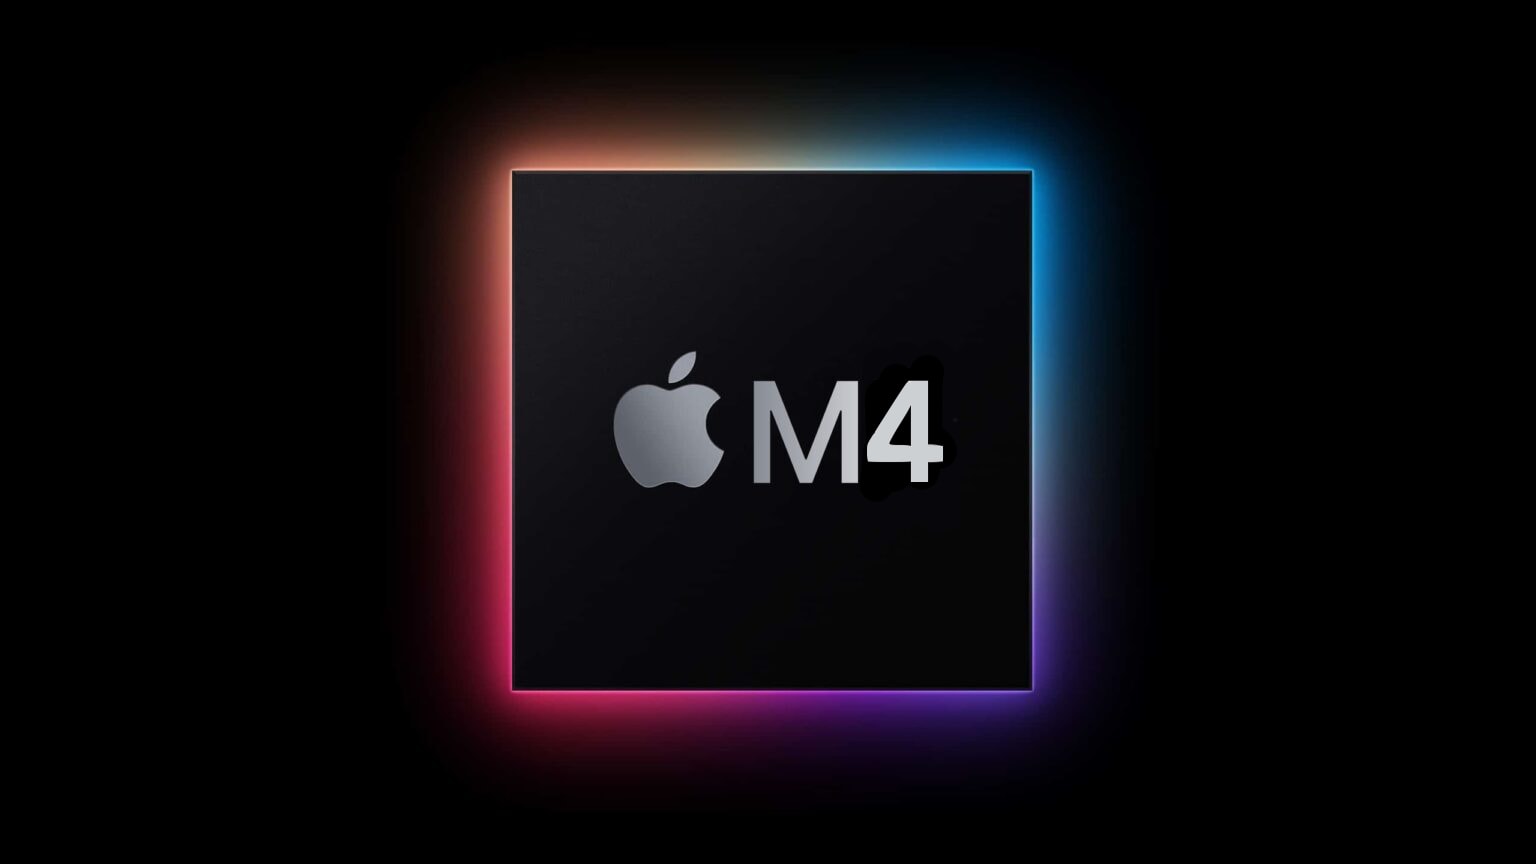 Apple's new M4 chips include "Donan", "Brava", and "Hidra" variants